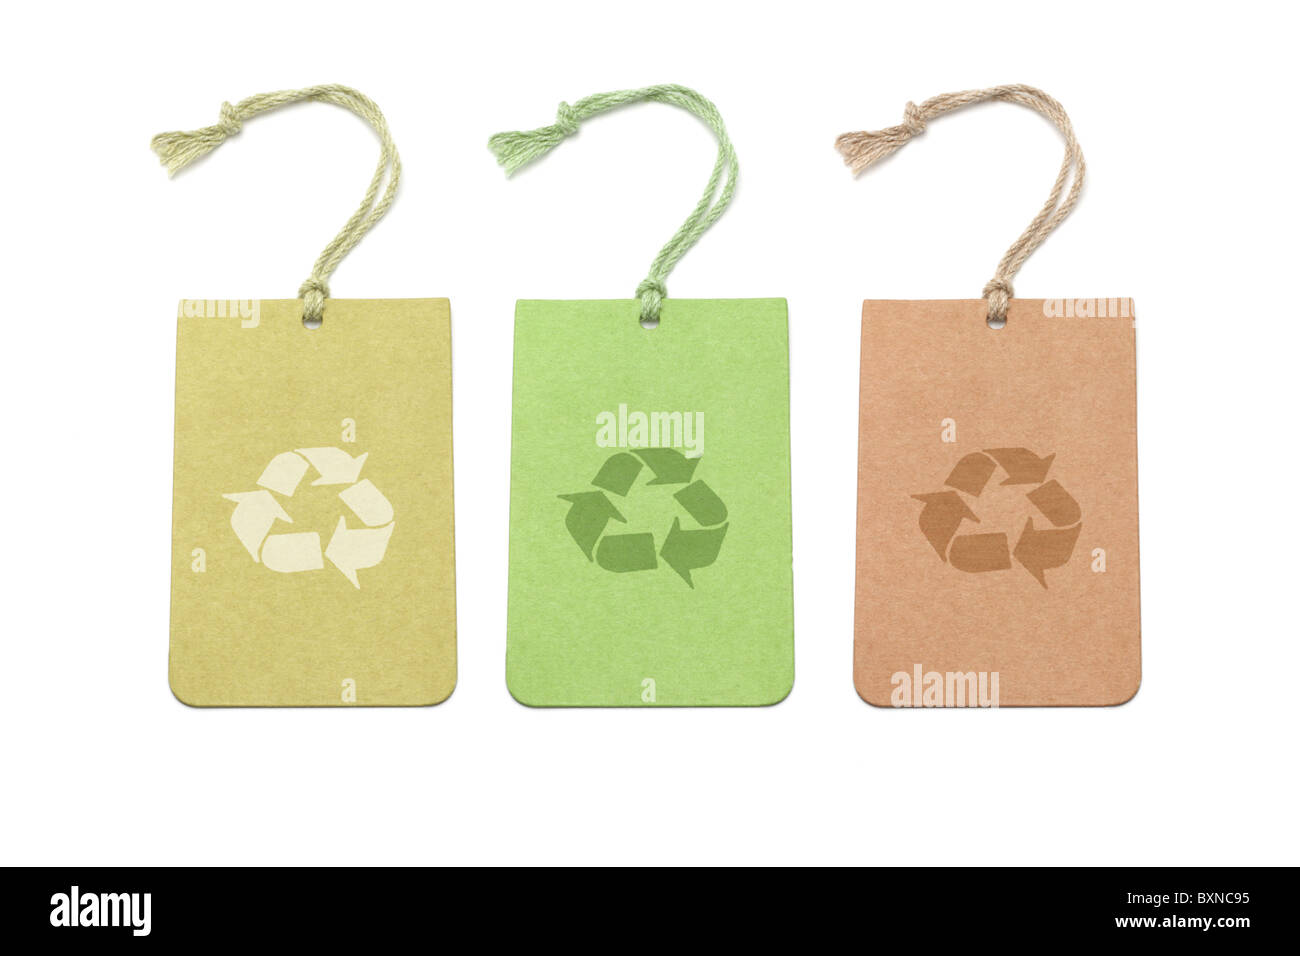 Three color tags with recycling symbols arranged on white background Stock Photo